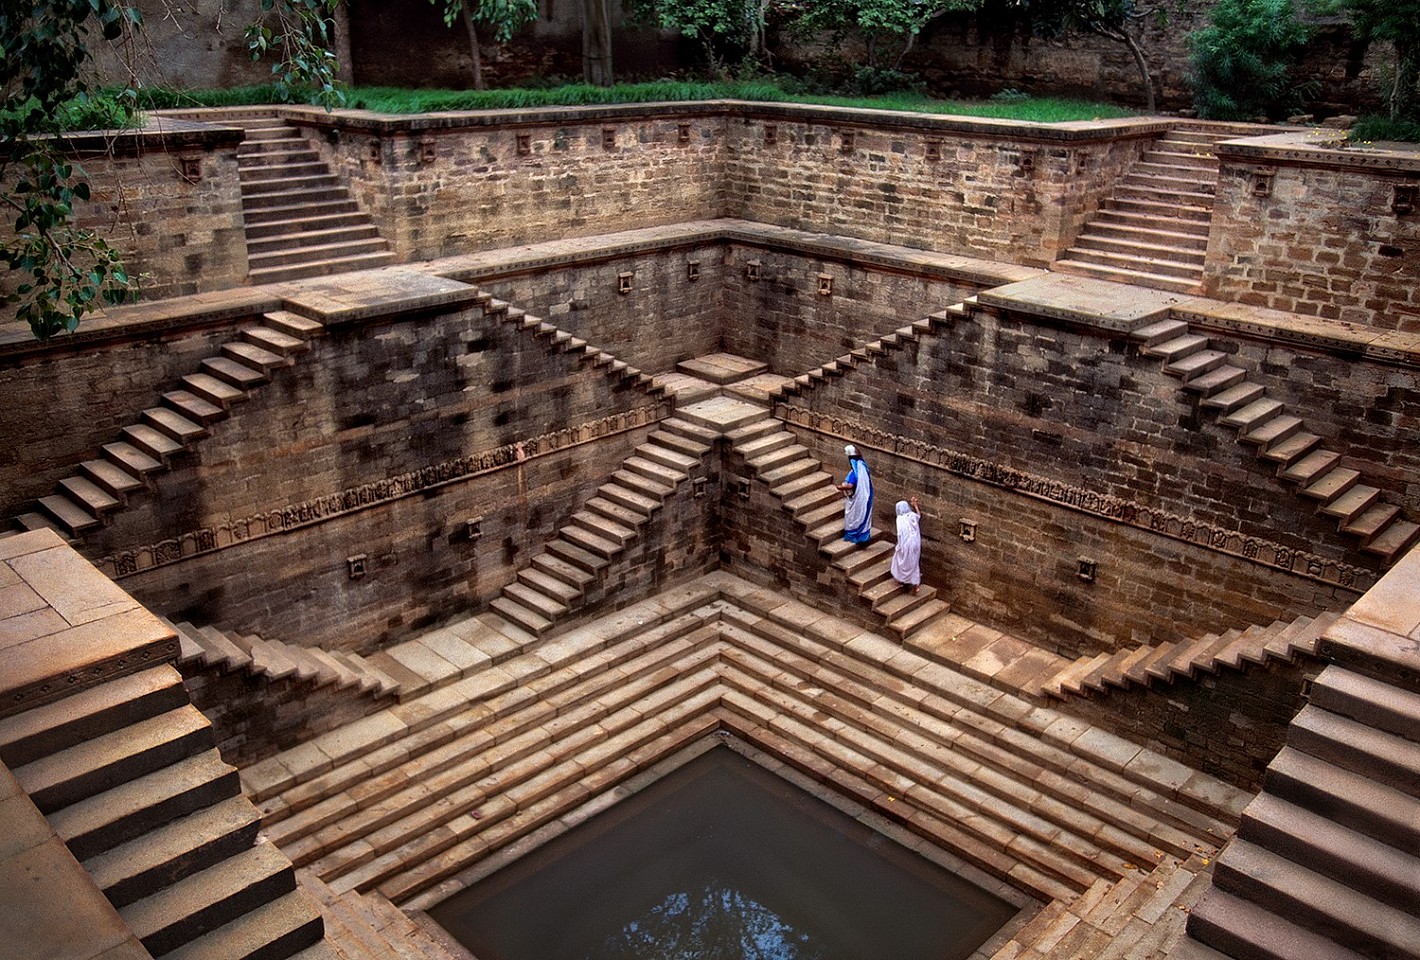 Steve McCurry, Stepwell, 2002
FujiFlex Crystal Archive Print, (Inquire for available sizes)
INDIA-10875